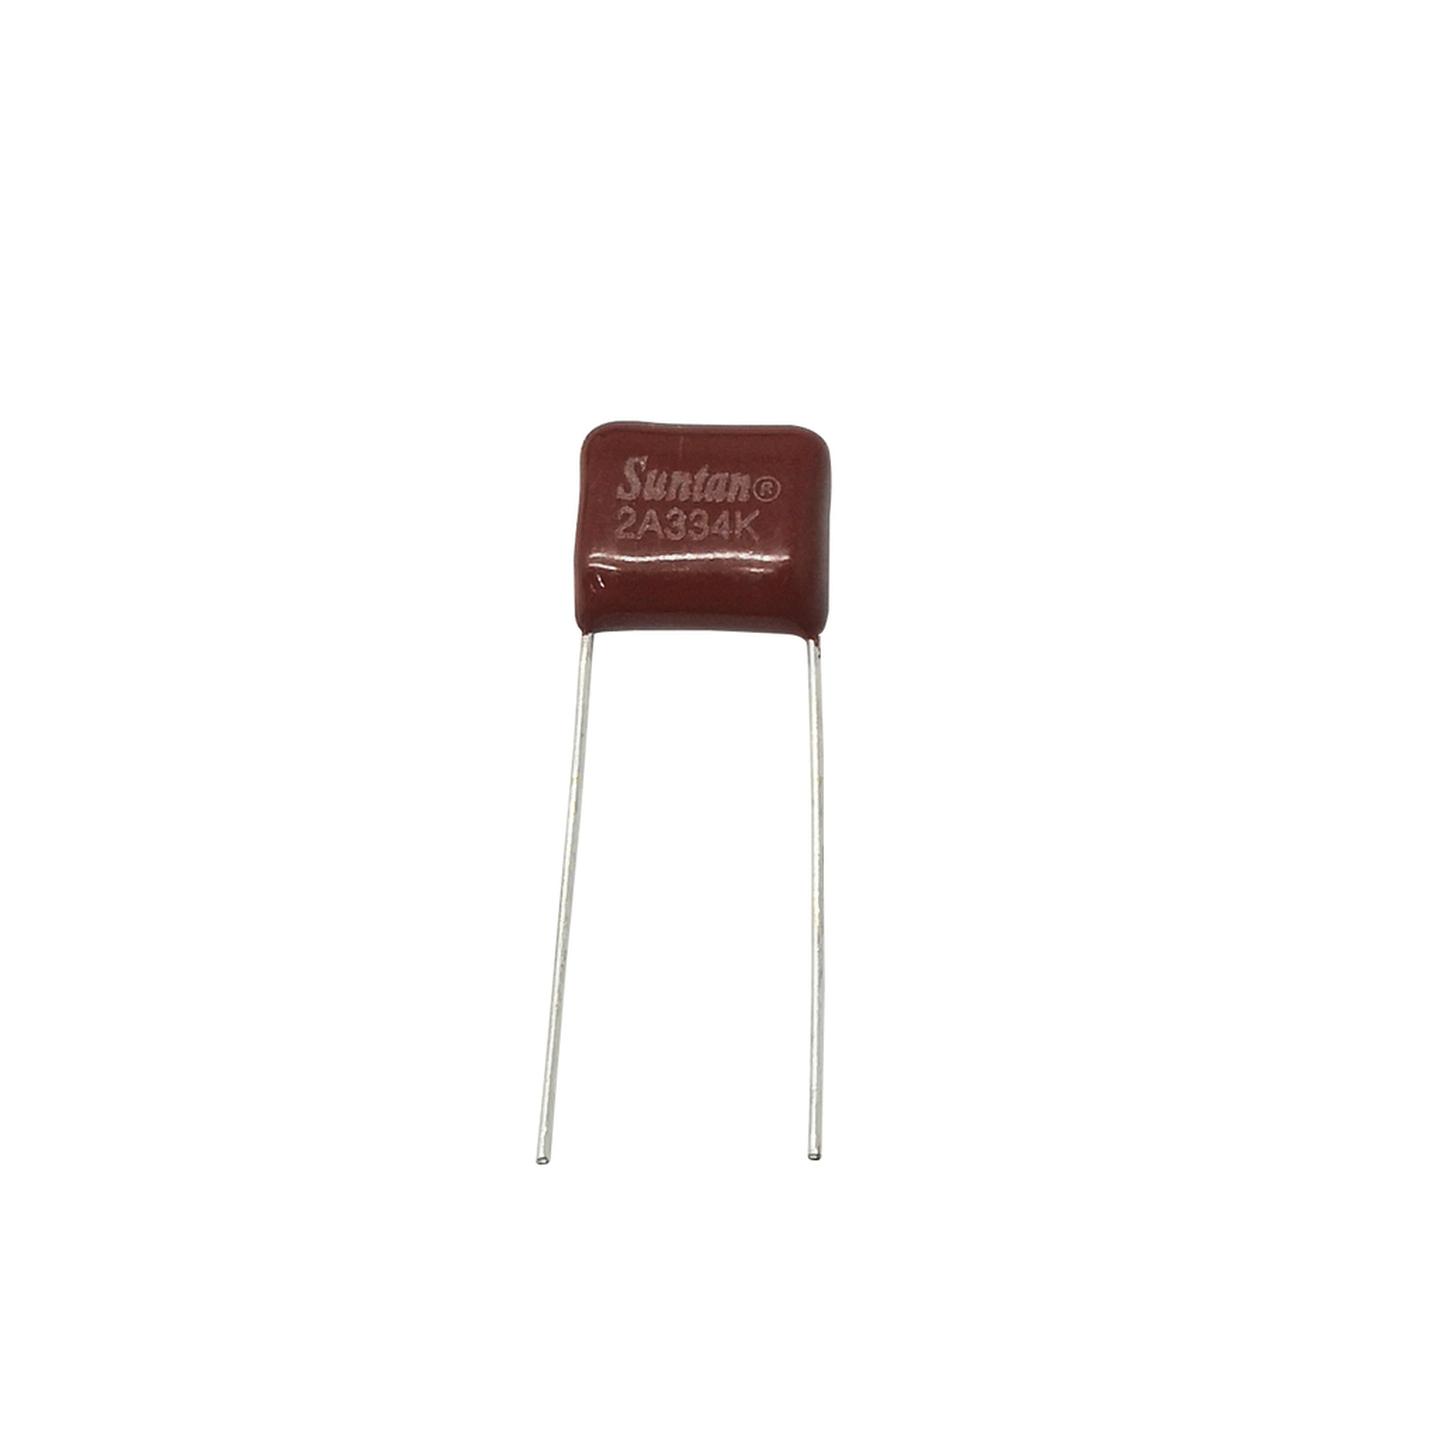 330nF 100VDC Polyester Capacitor